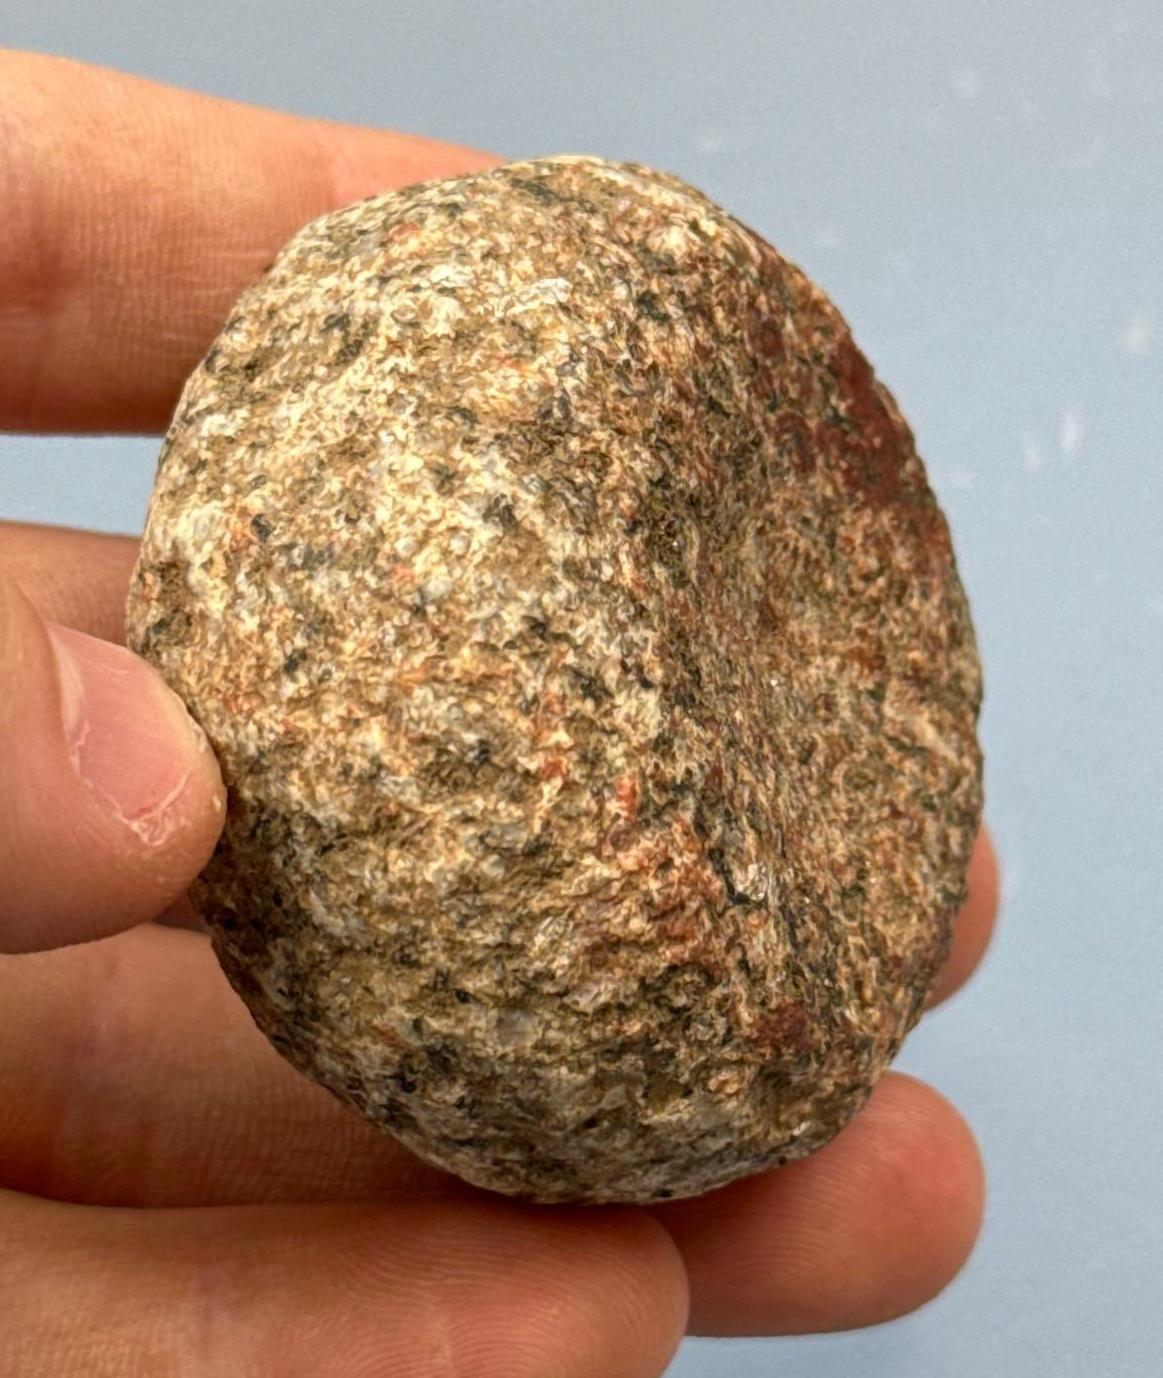 2 1/8" Diameter Granite Double Cupped Discoidal, Found in New Jersey